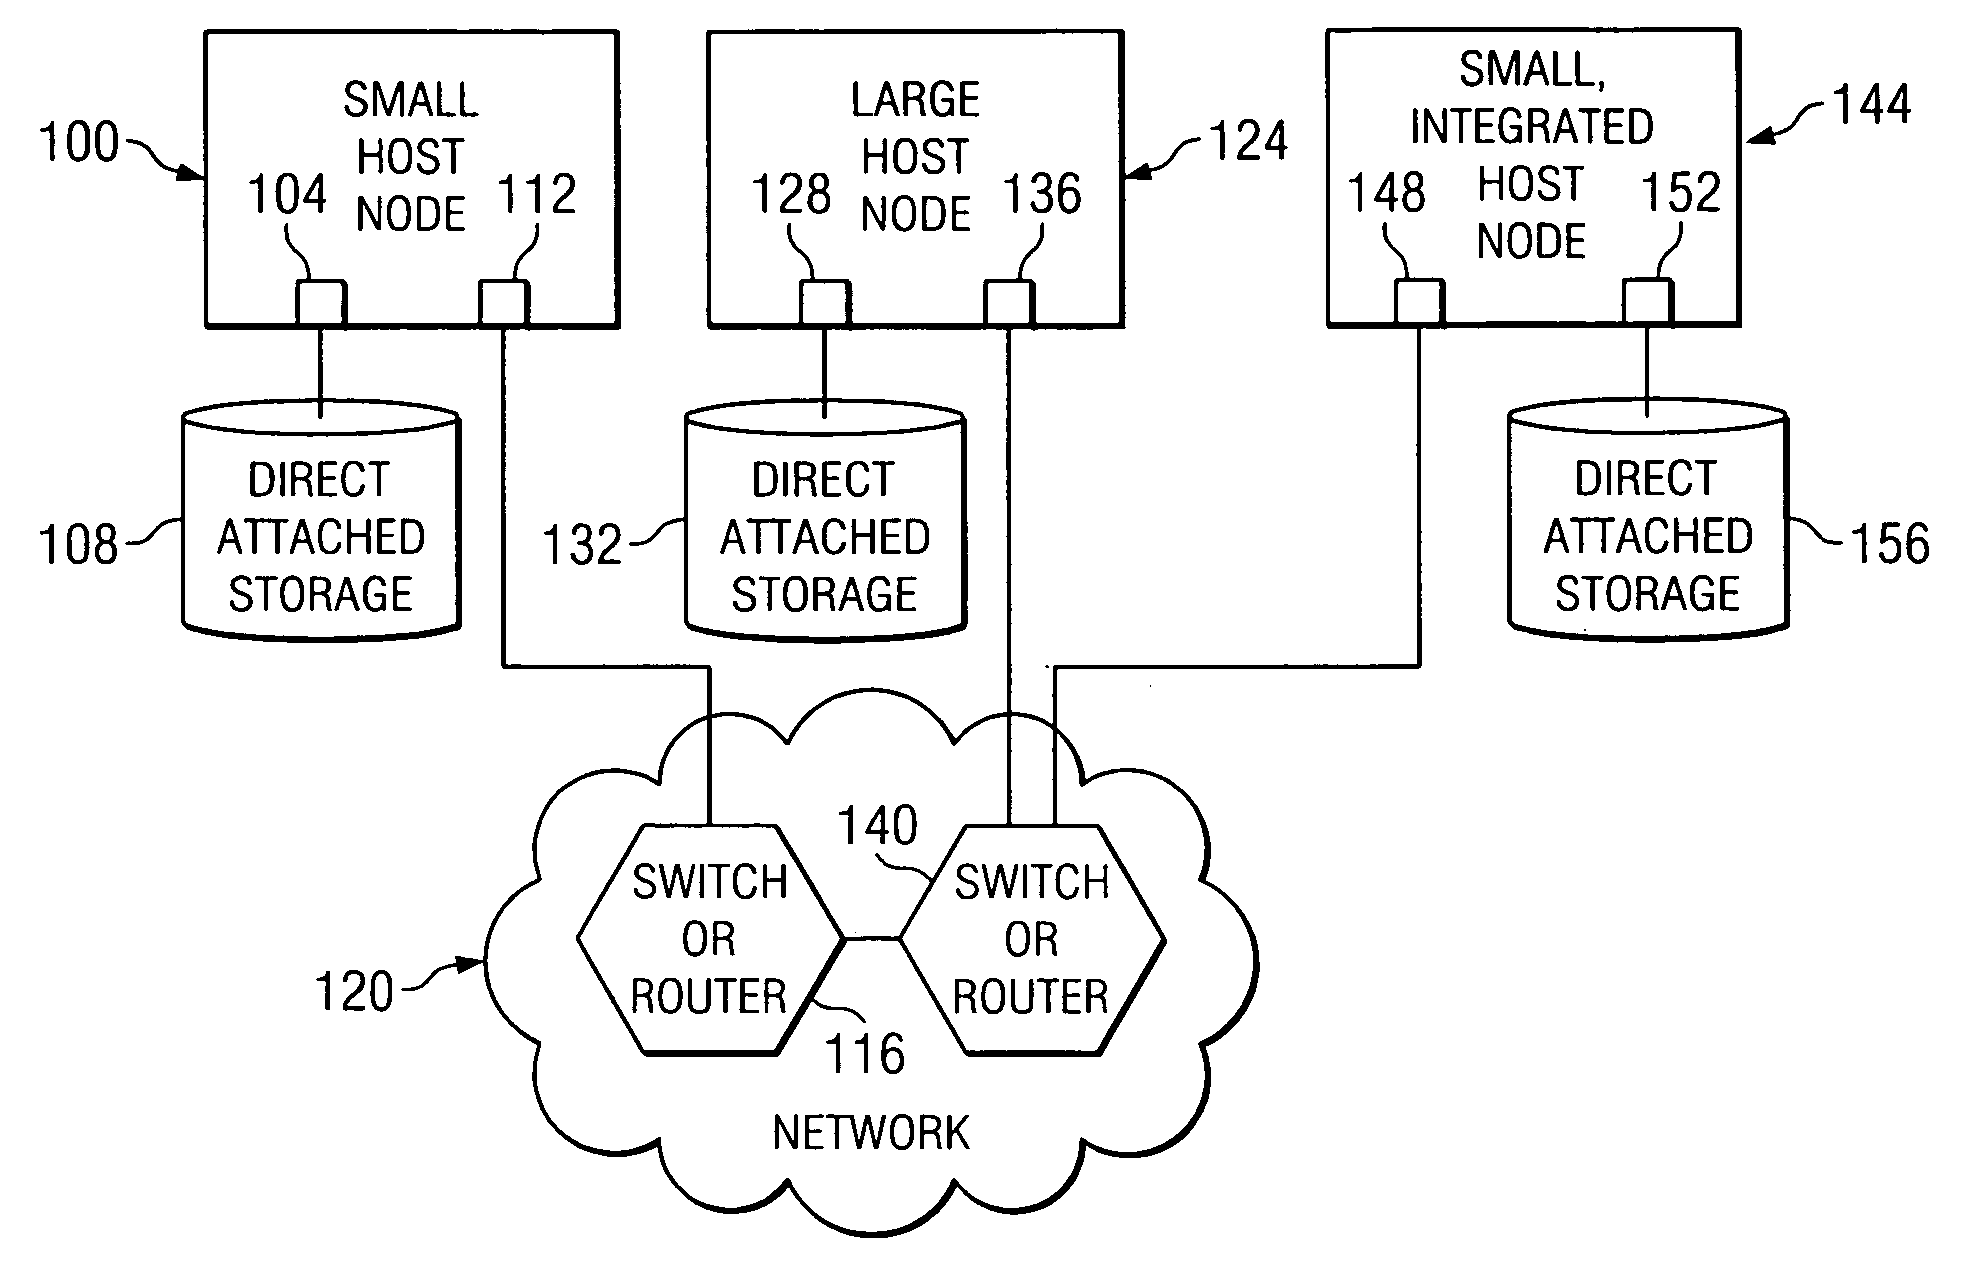 System and method for virtual resource initialization on a physical adapter that supports virtual resources